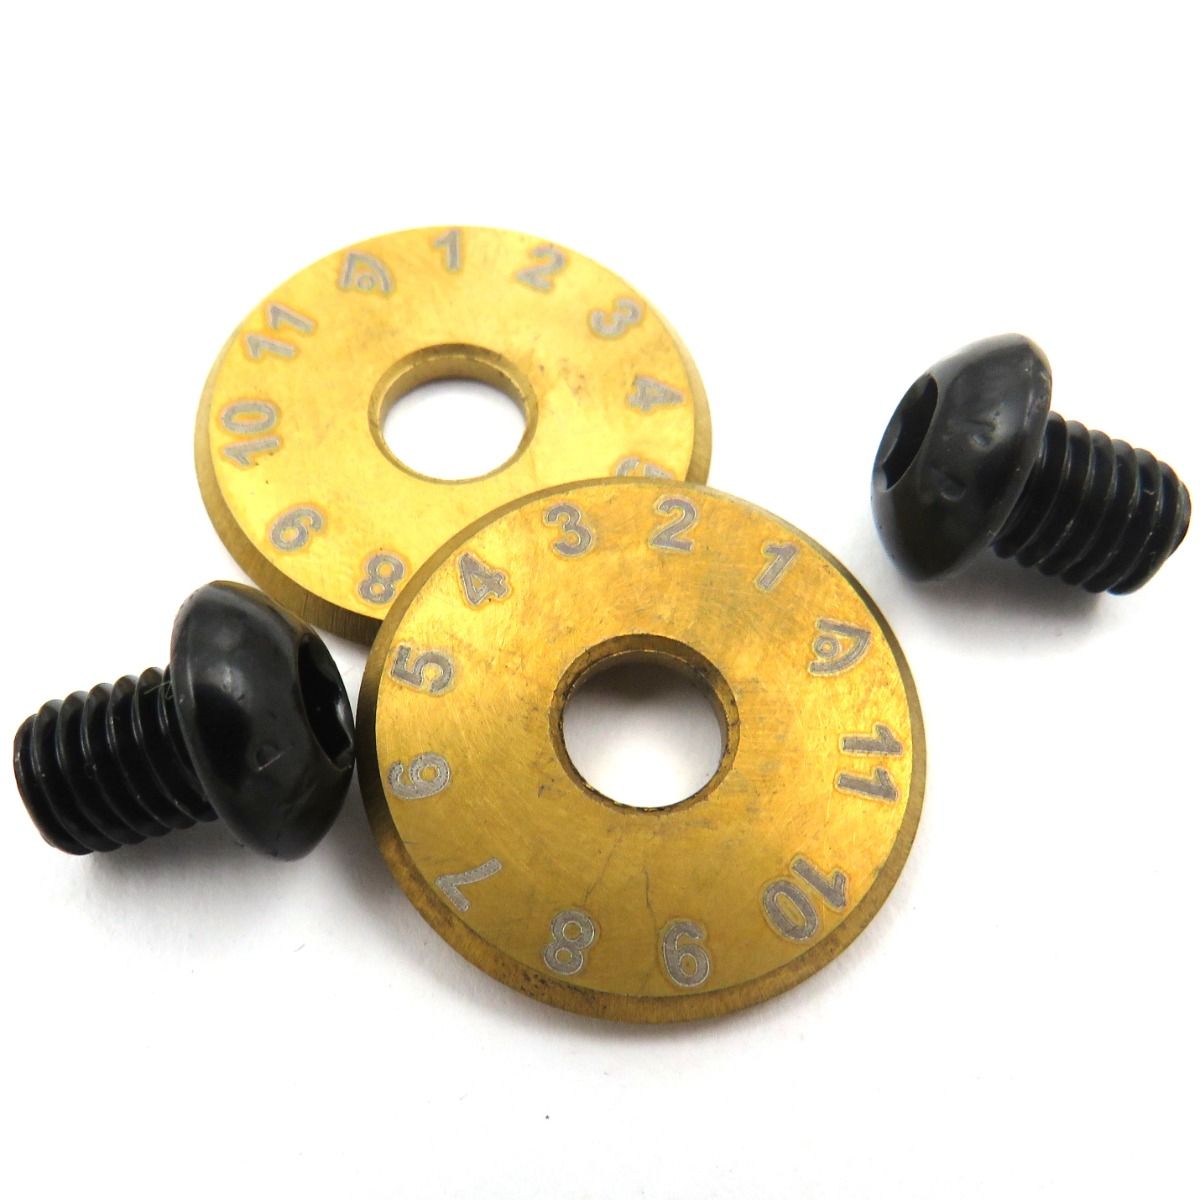 Replacement Wheels for PowerPlus Nippers